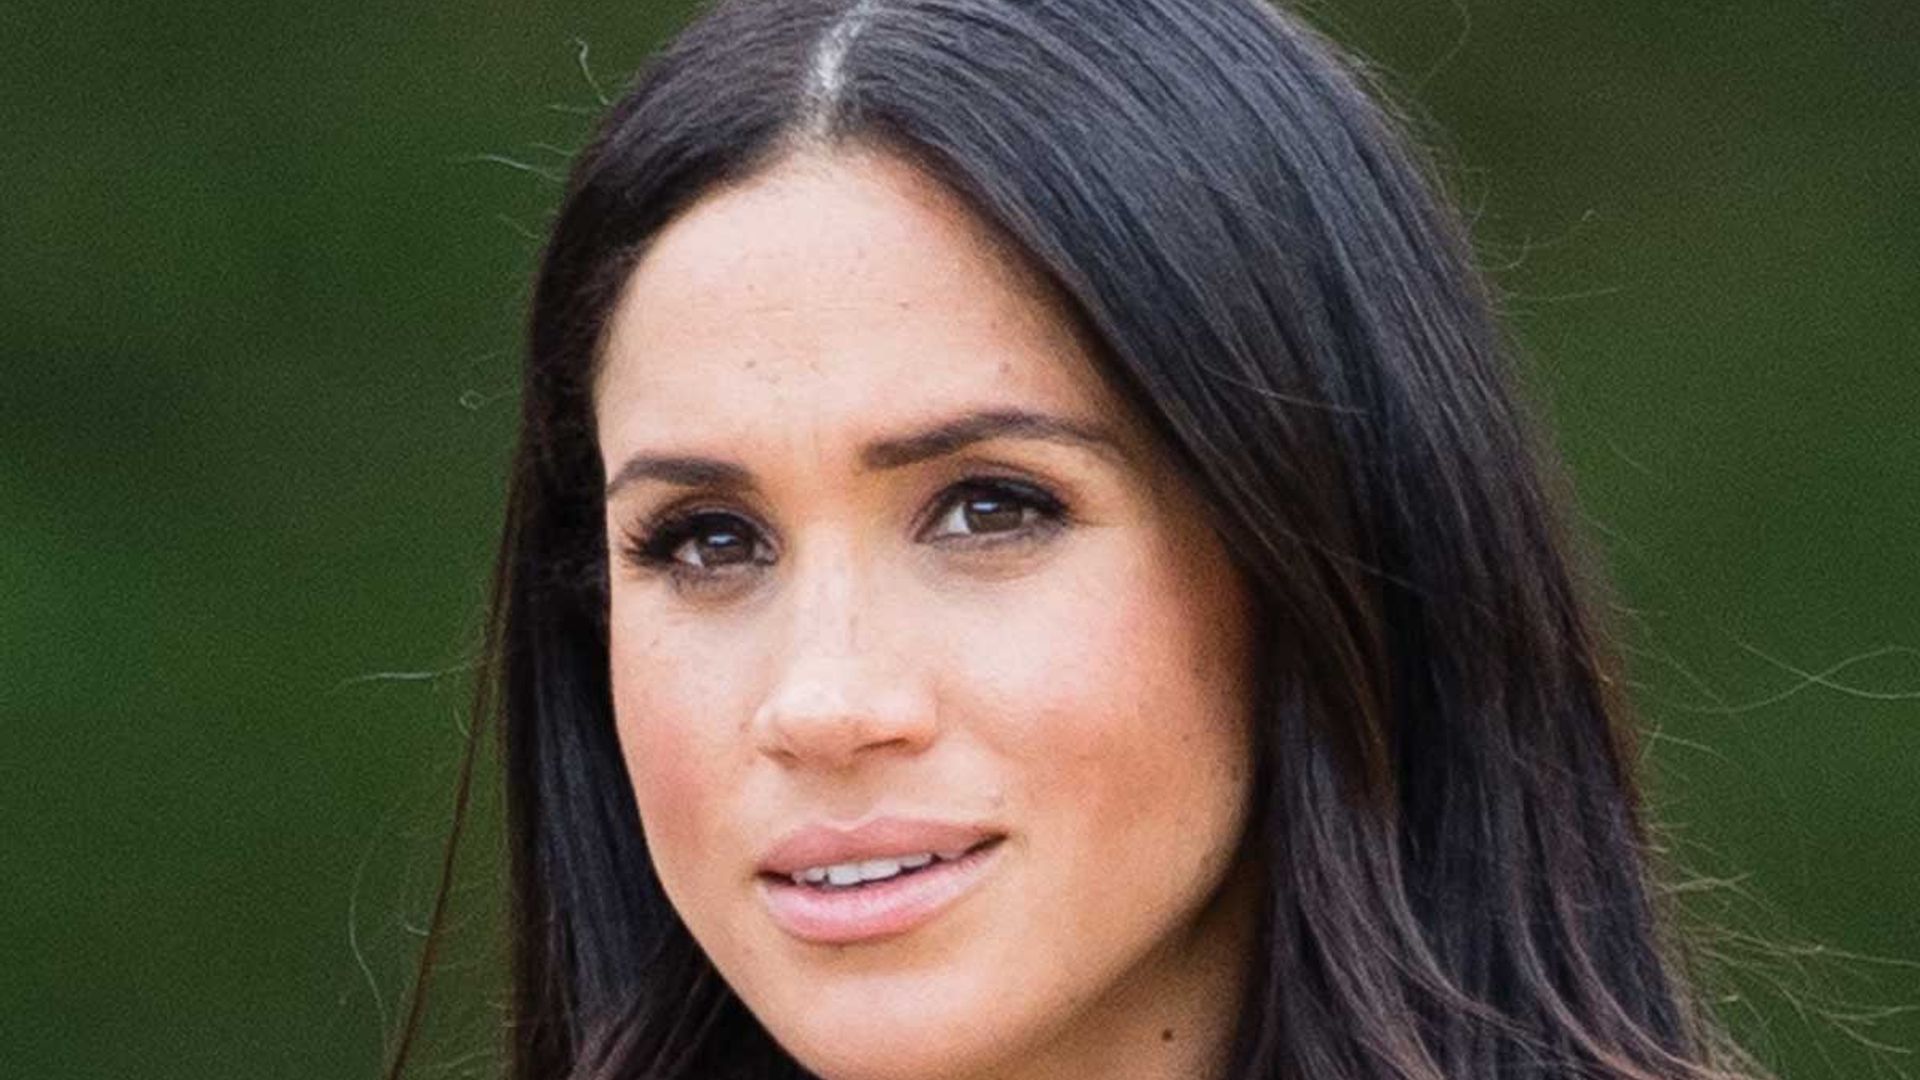 Meghan Markle faces stress alone after Montecito residents told to